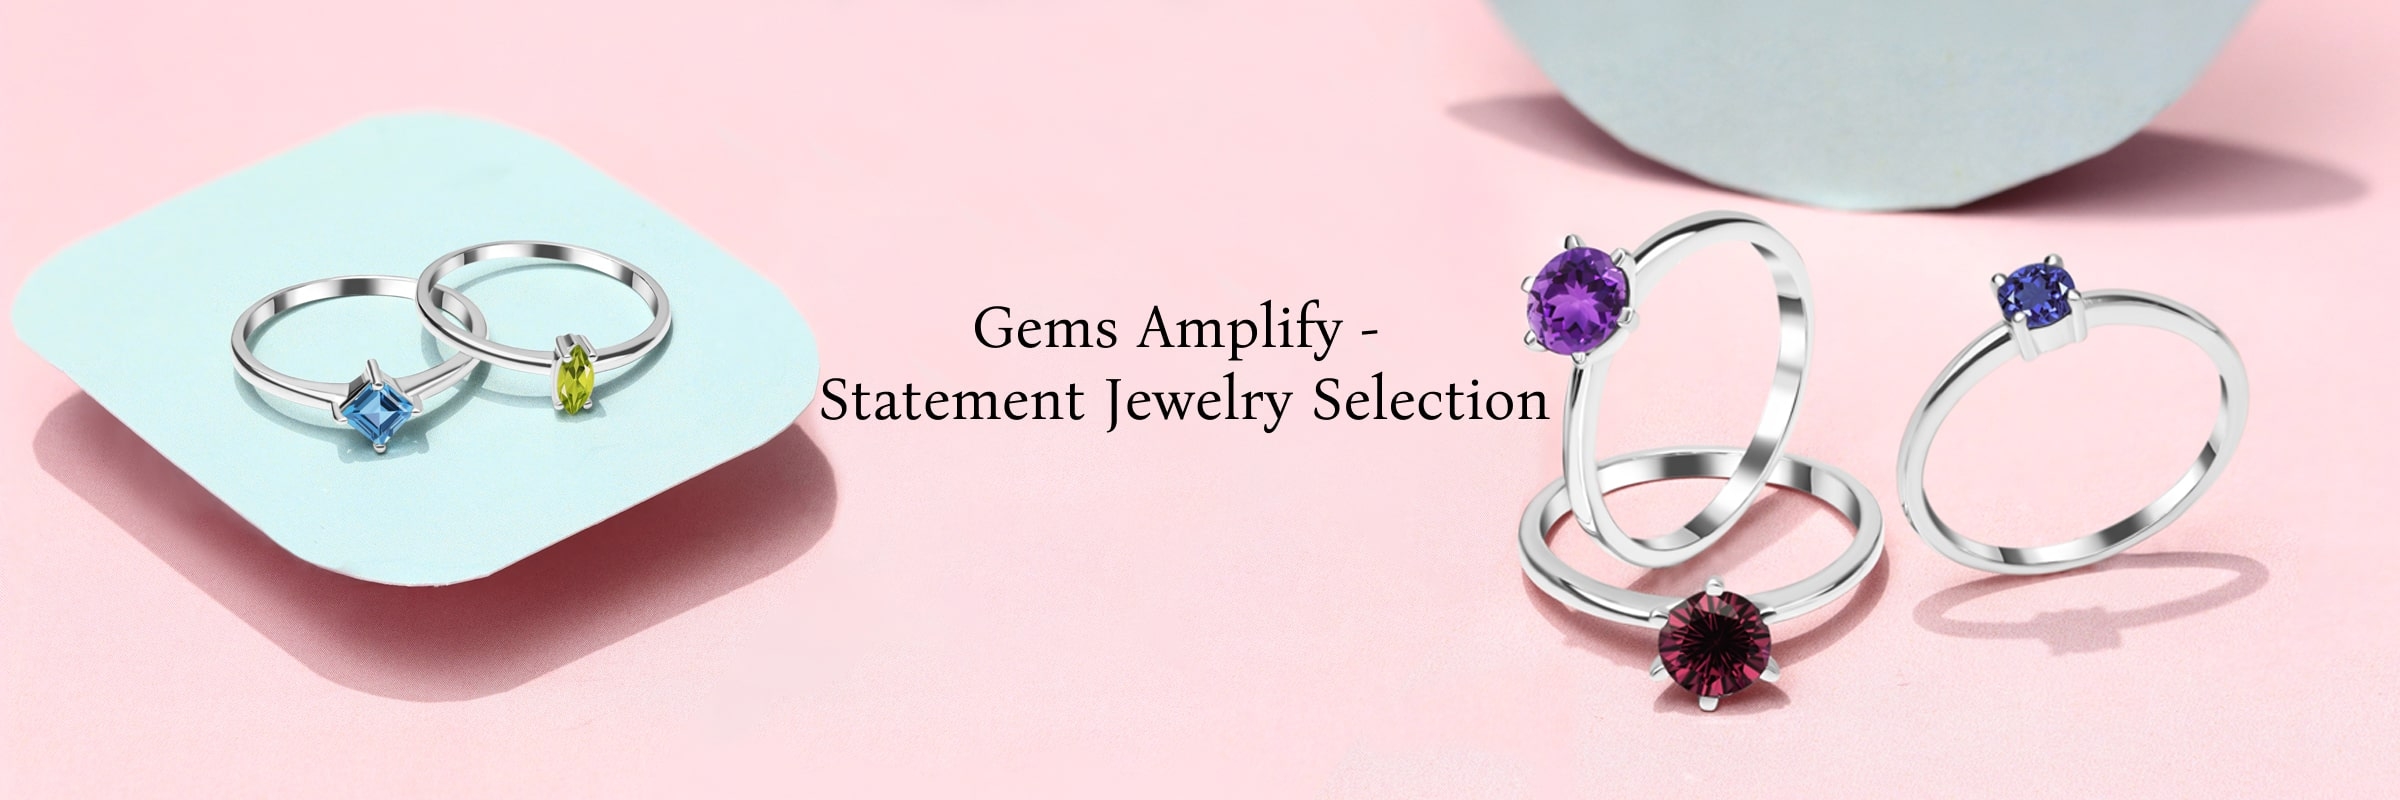 Gemstones that work well as the statement jewelry